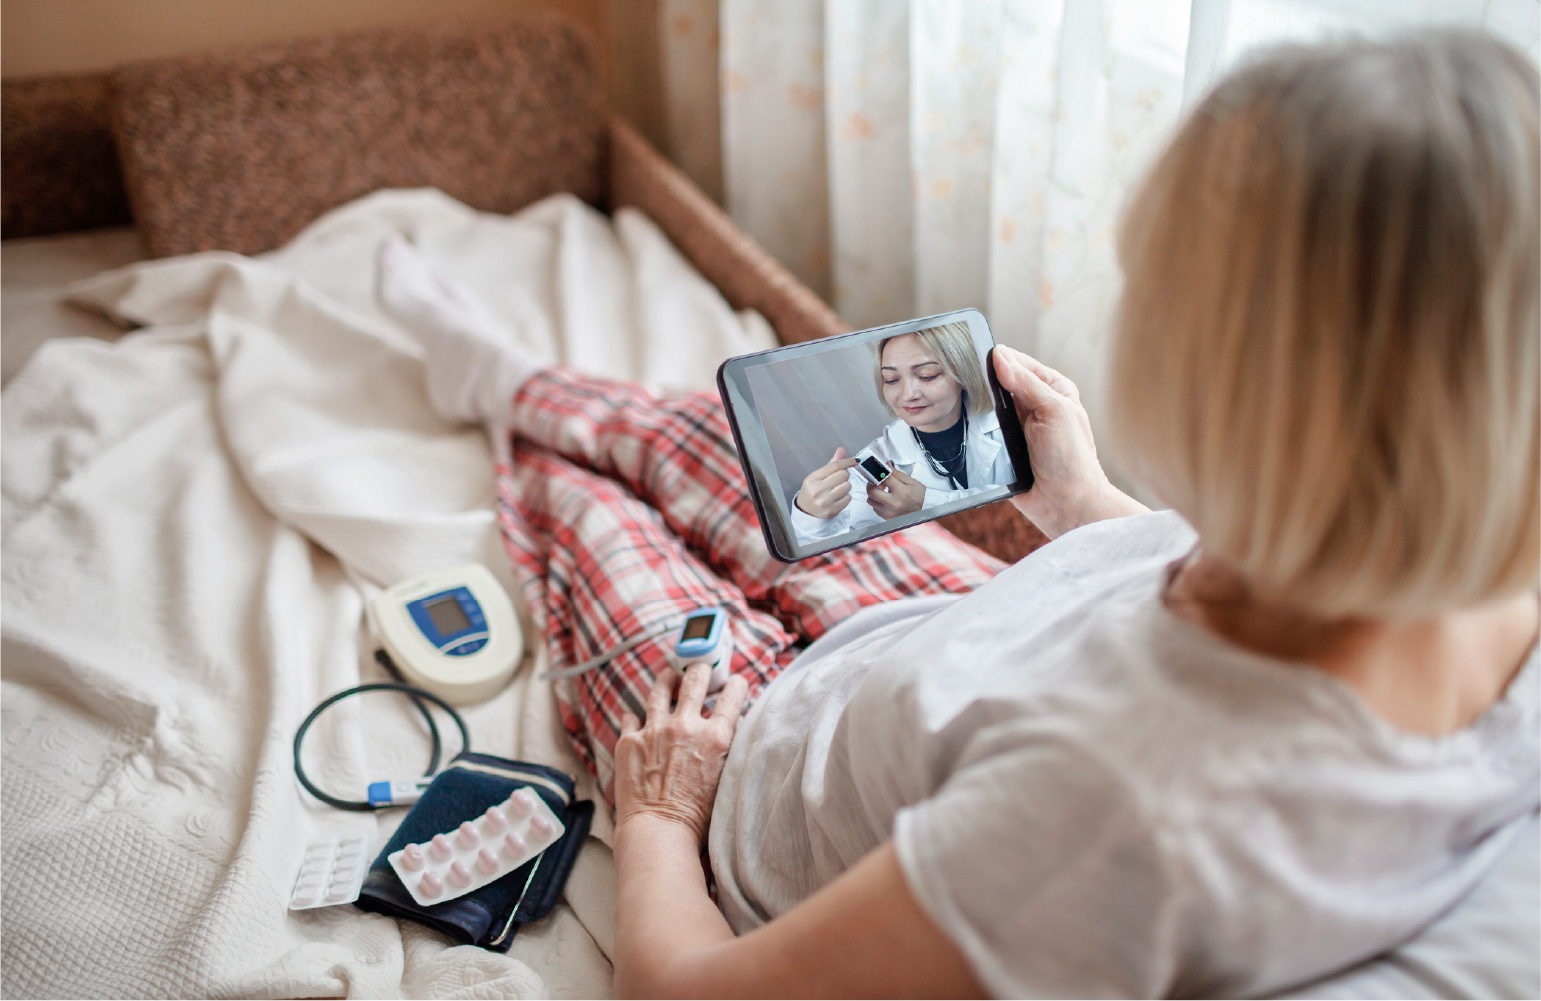 patient looking at an ipad screen talking to her doctor with remote patient monitoring tools hooked up